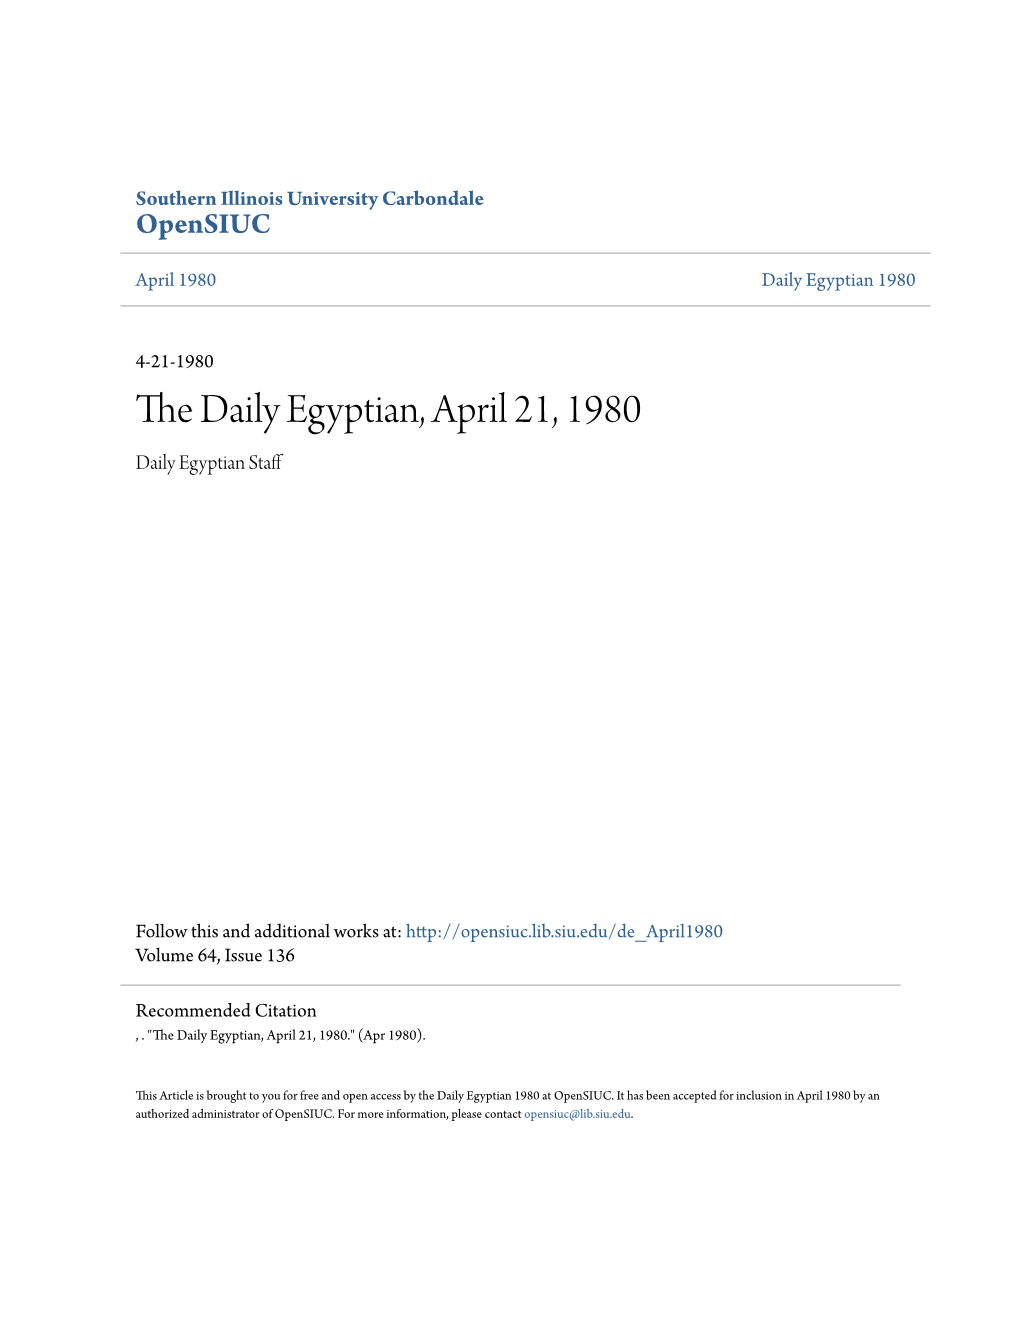 The Daily Egyptian, April 21, 1980